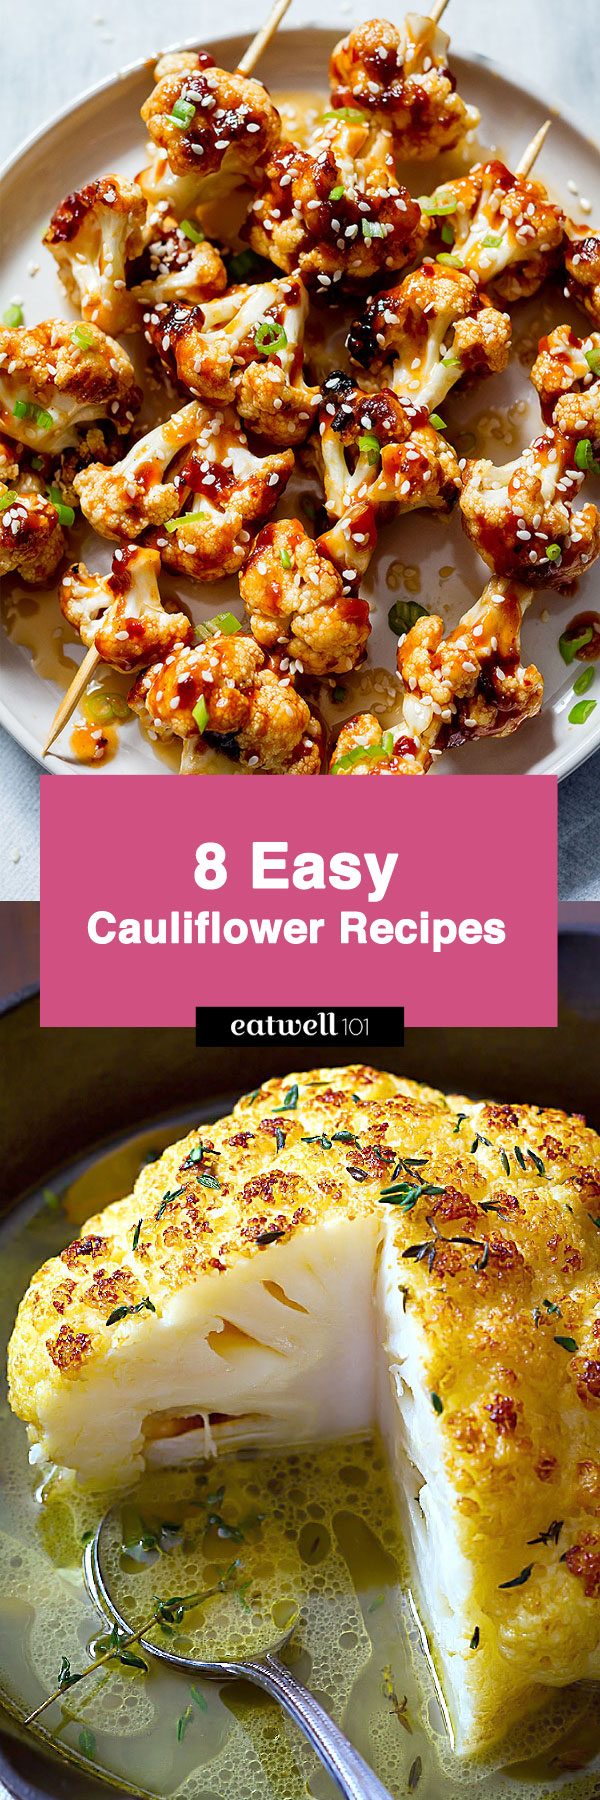 Cauliflower recipes — From roasted to slow cooked and riced, this super vegetable is about to rule your kitchen with our delicious cauliflower recipes!